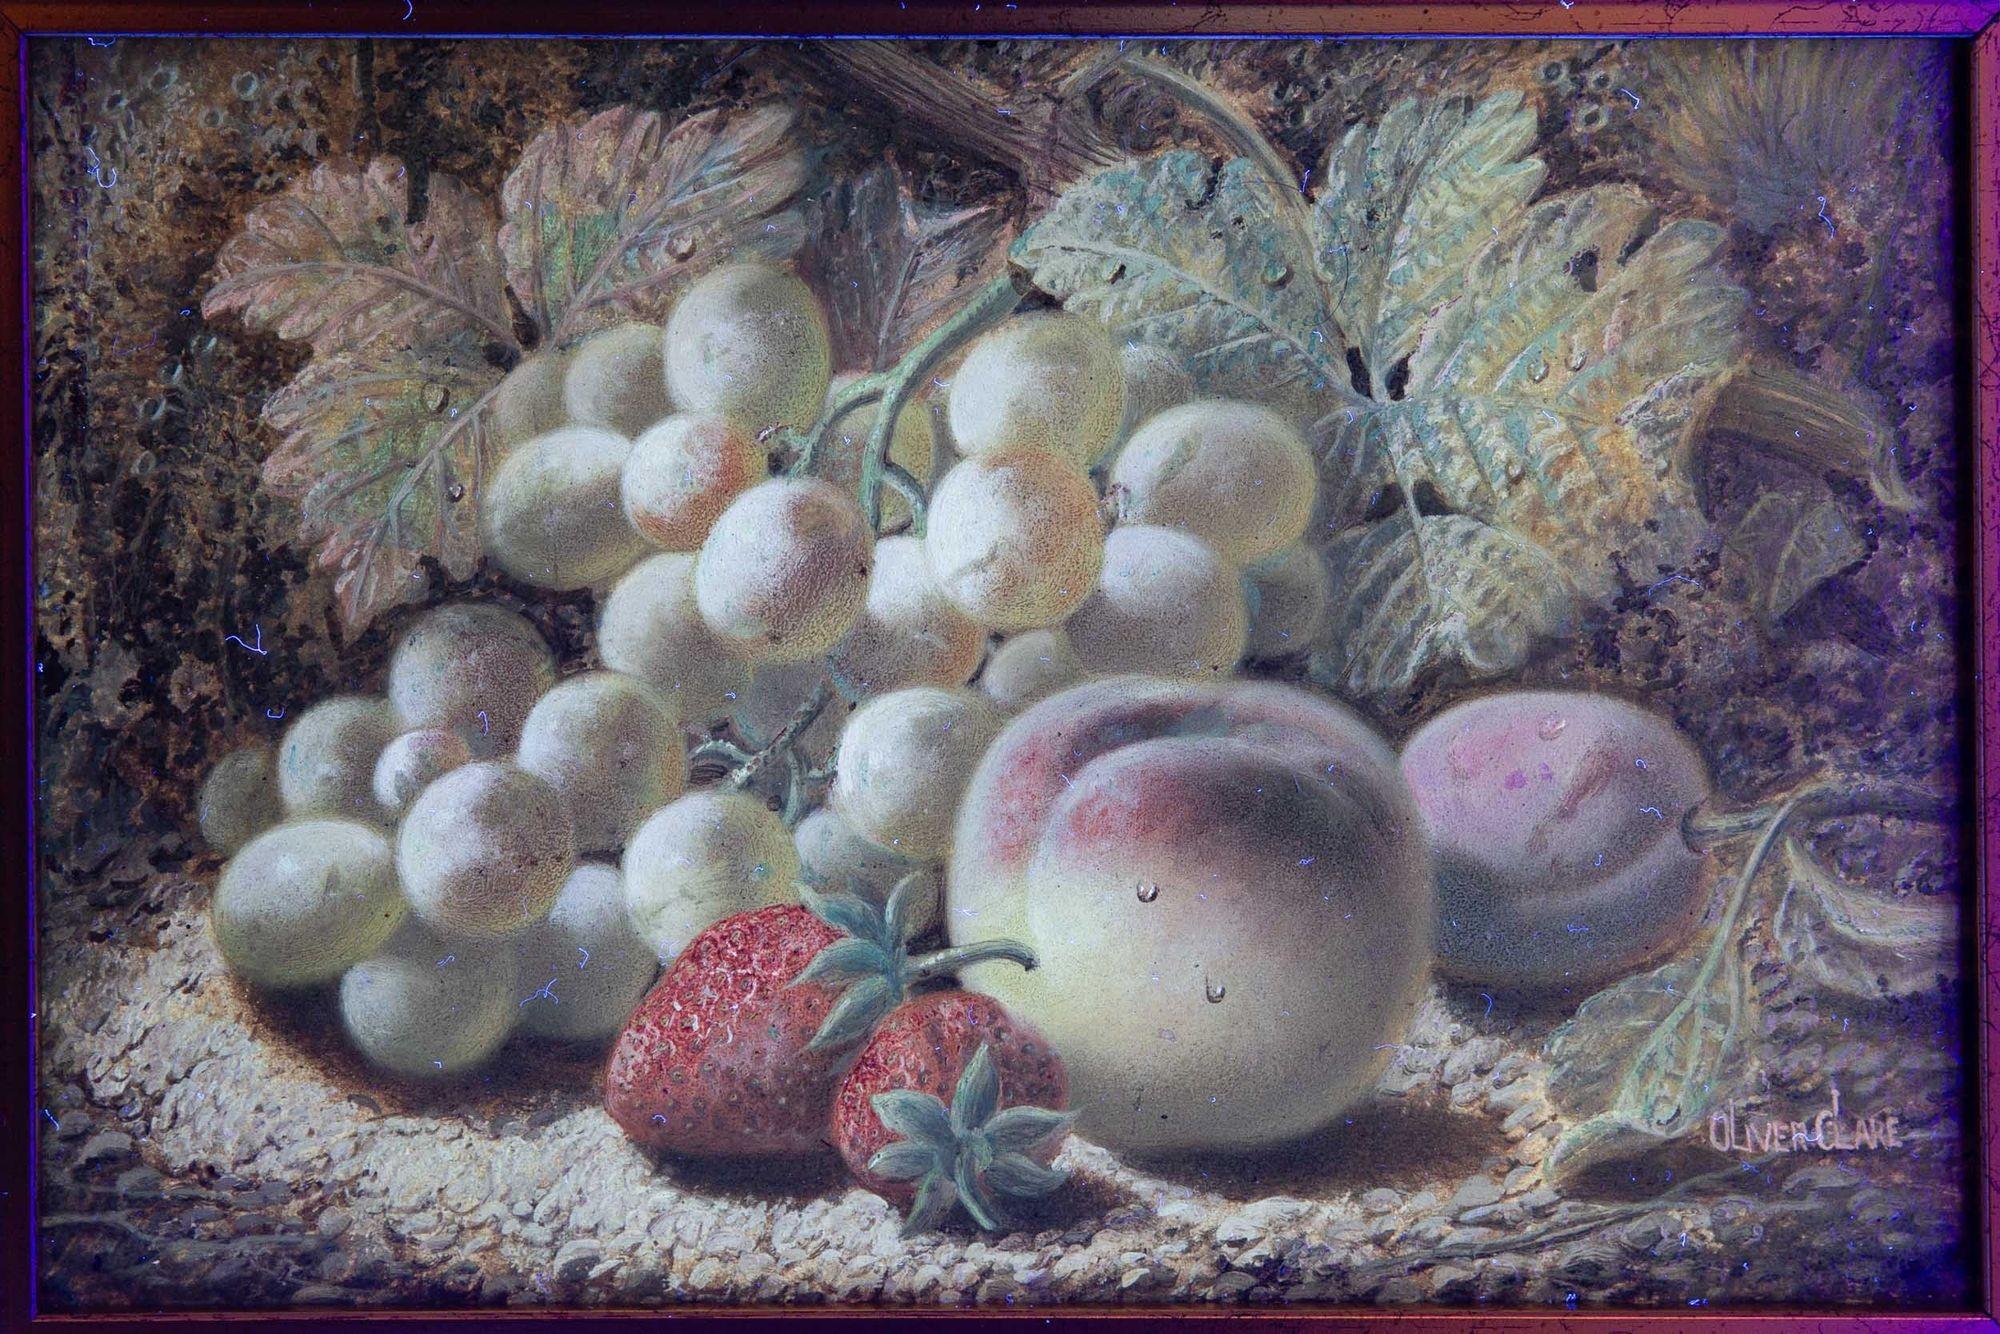 Antique Still-Life Painting of Fruits by Oliver Clare 4